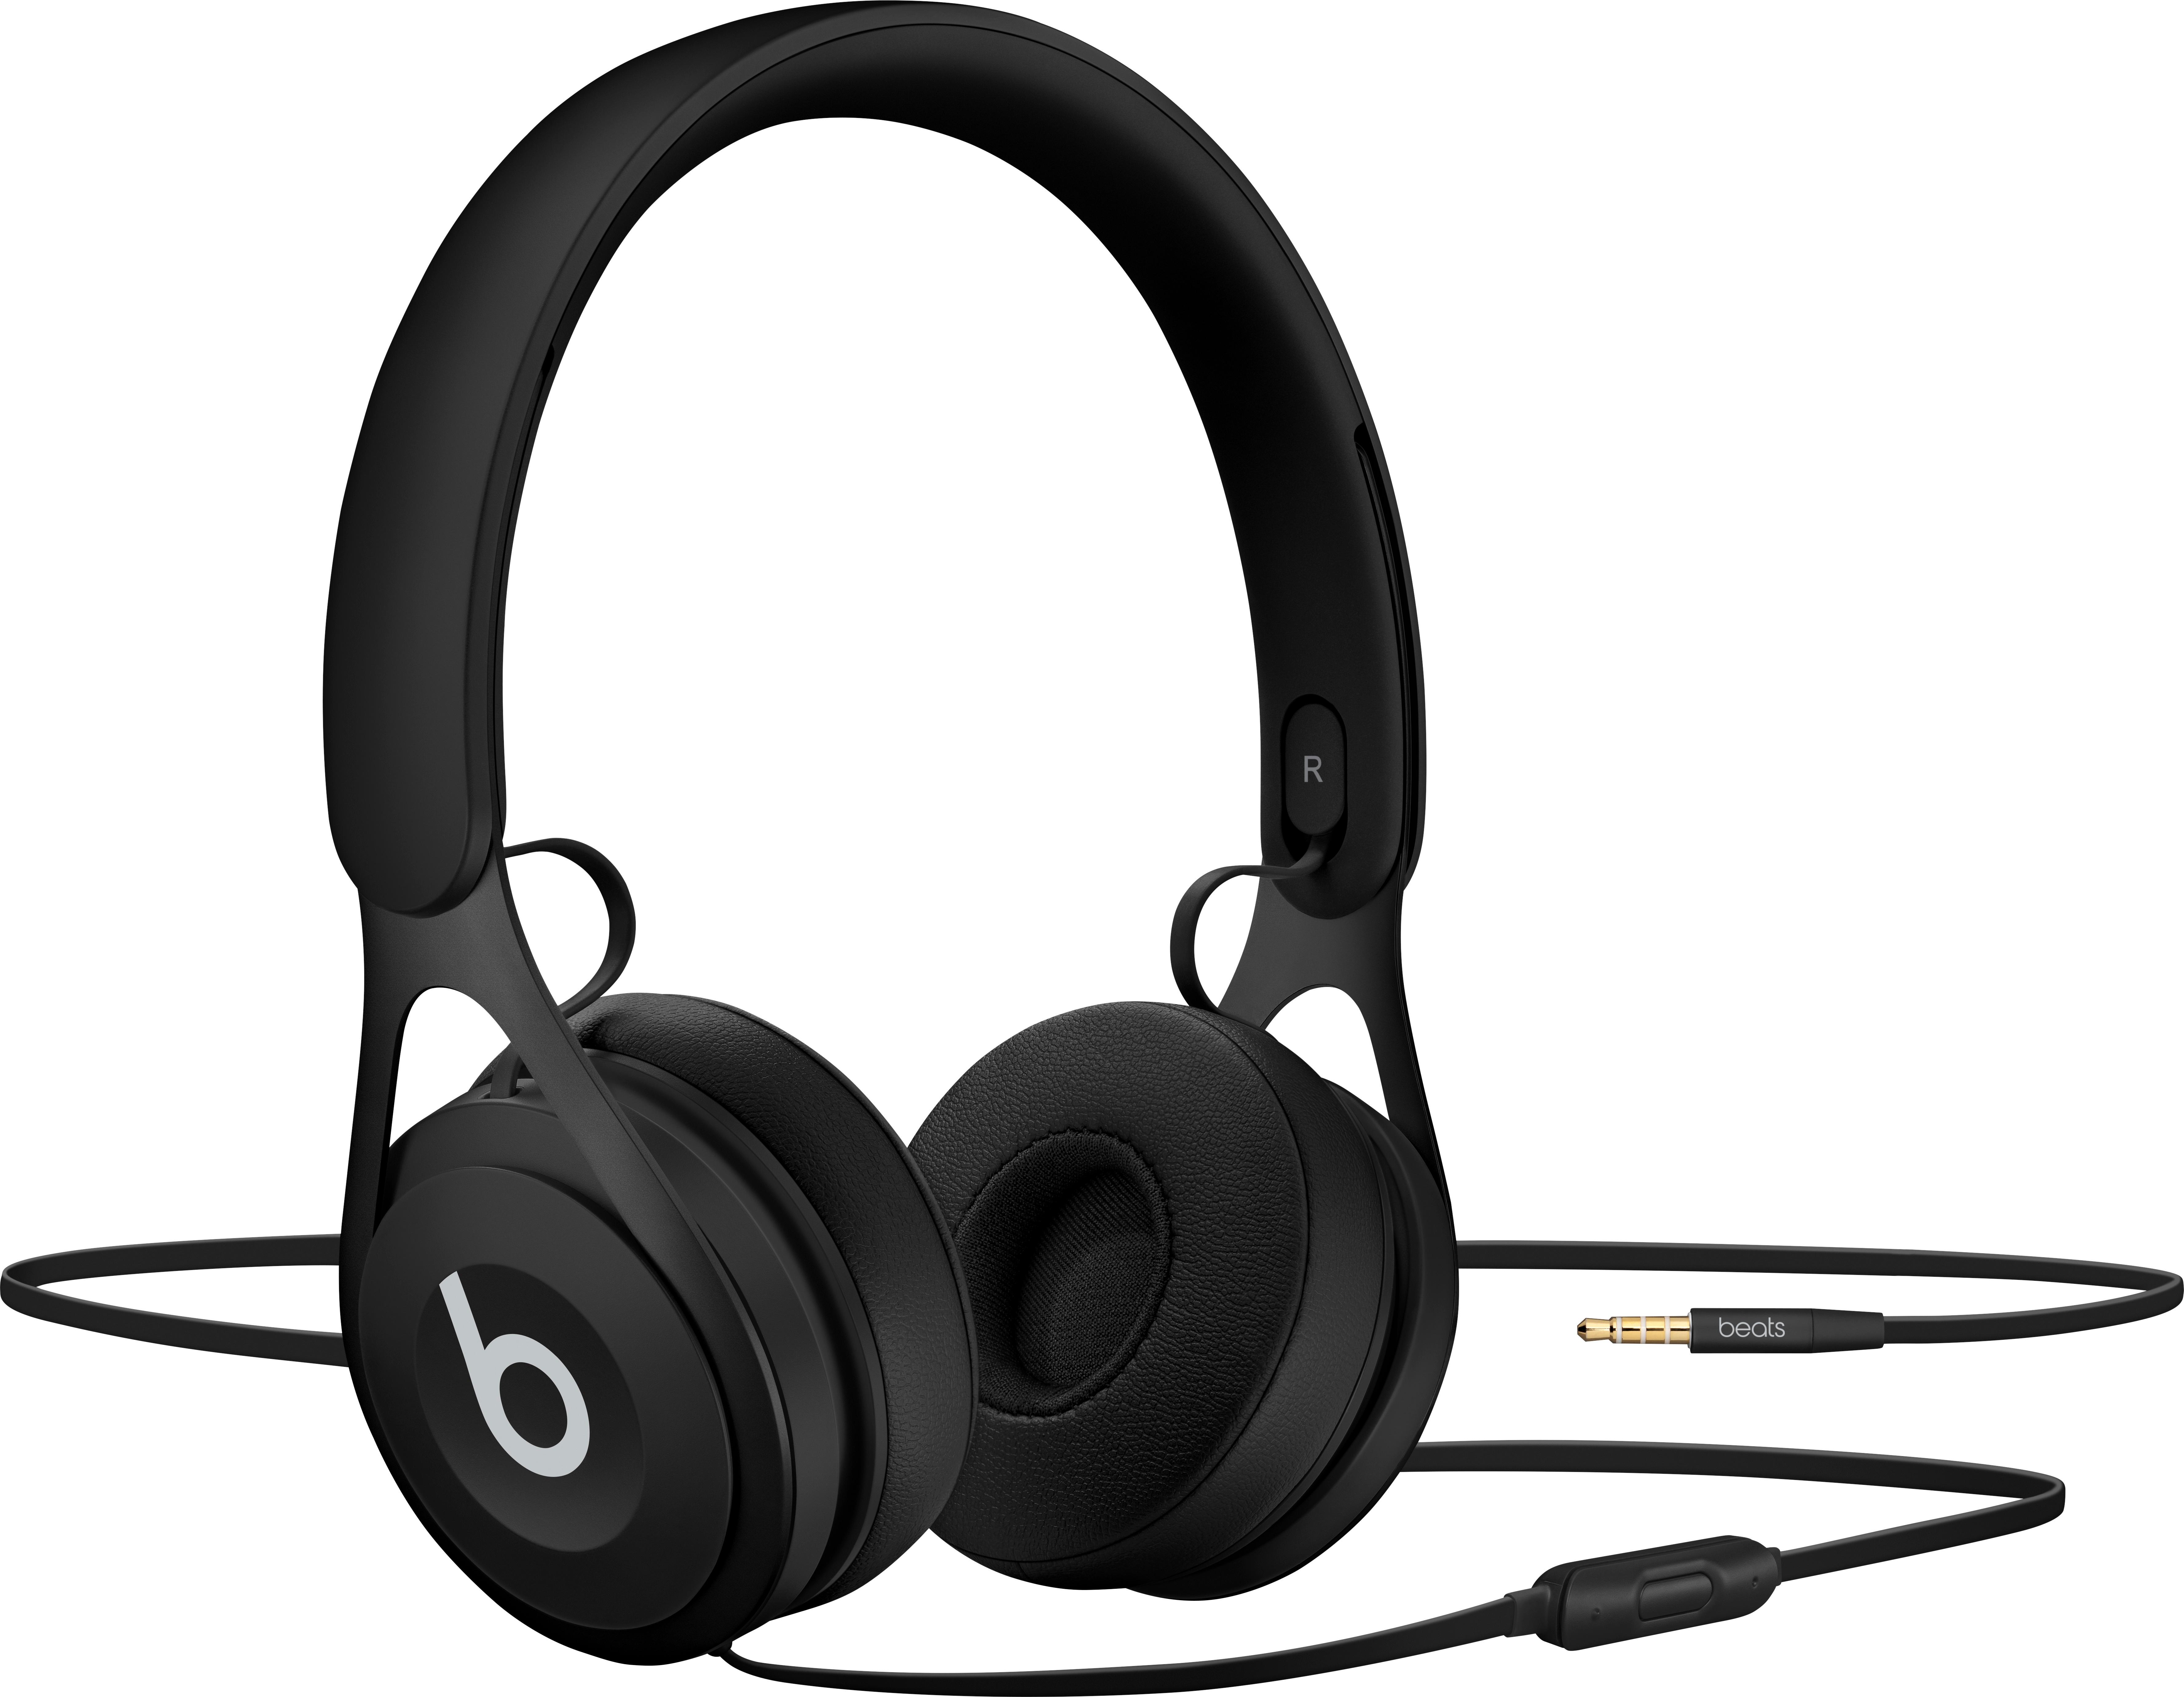 Angle View: Beats by Dr. Dre - Geek Squad Certified Refurbished Beats EP Headphones - Black